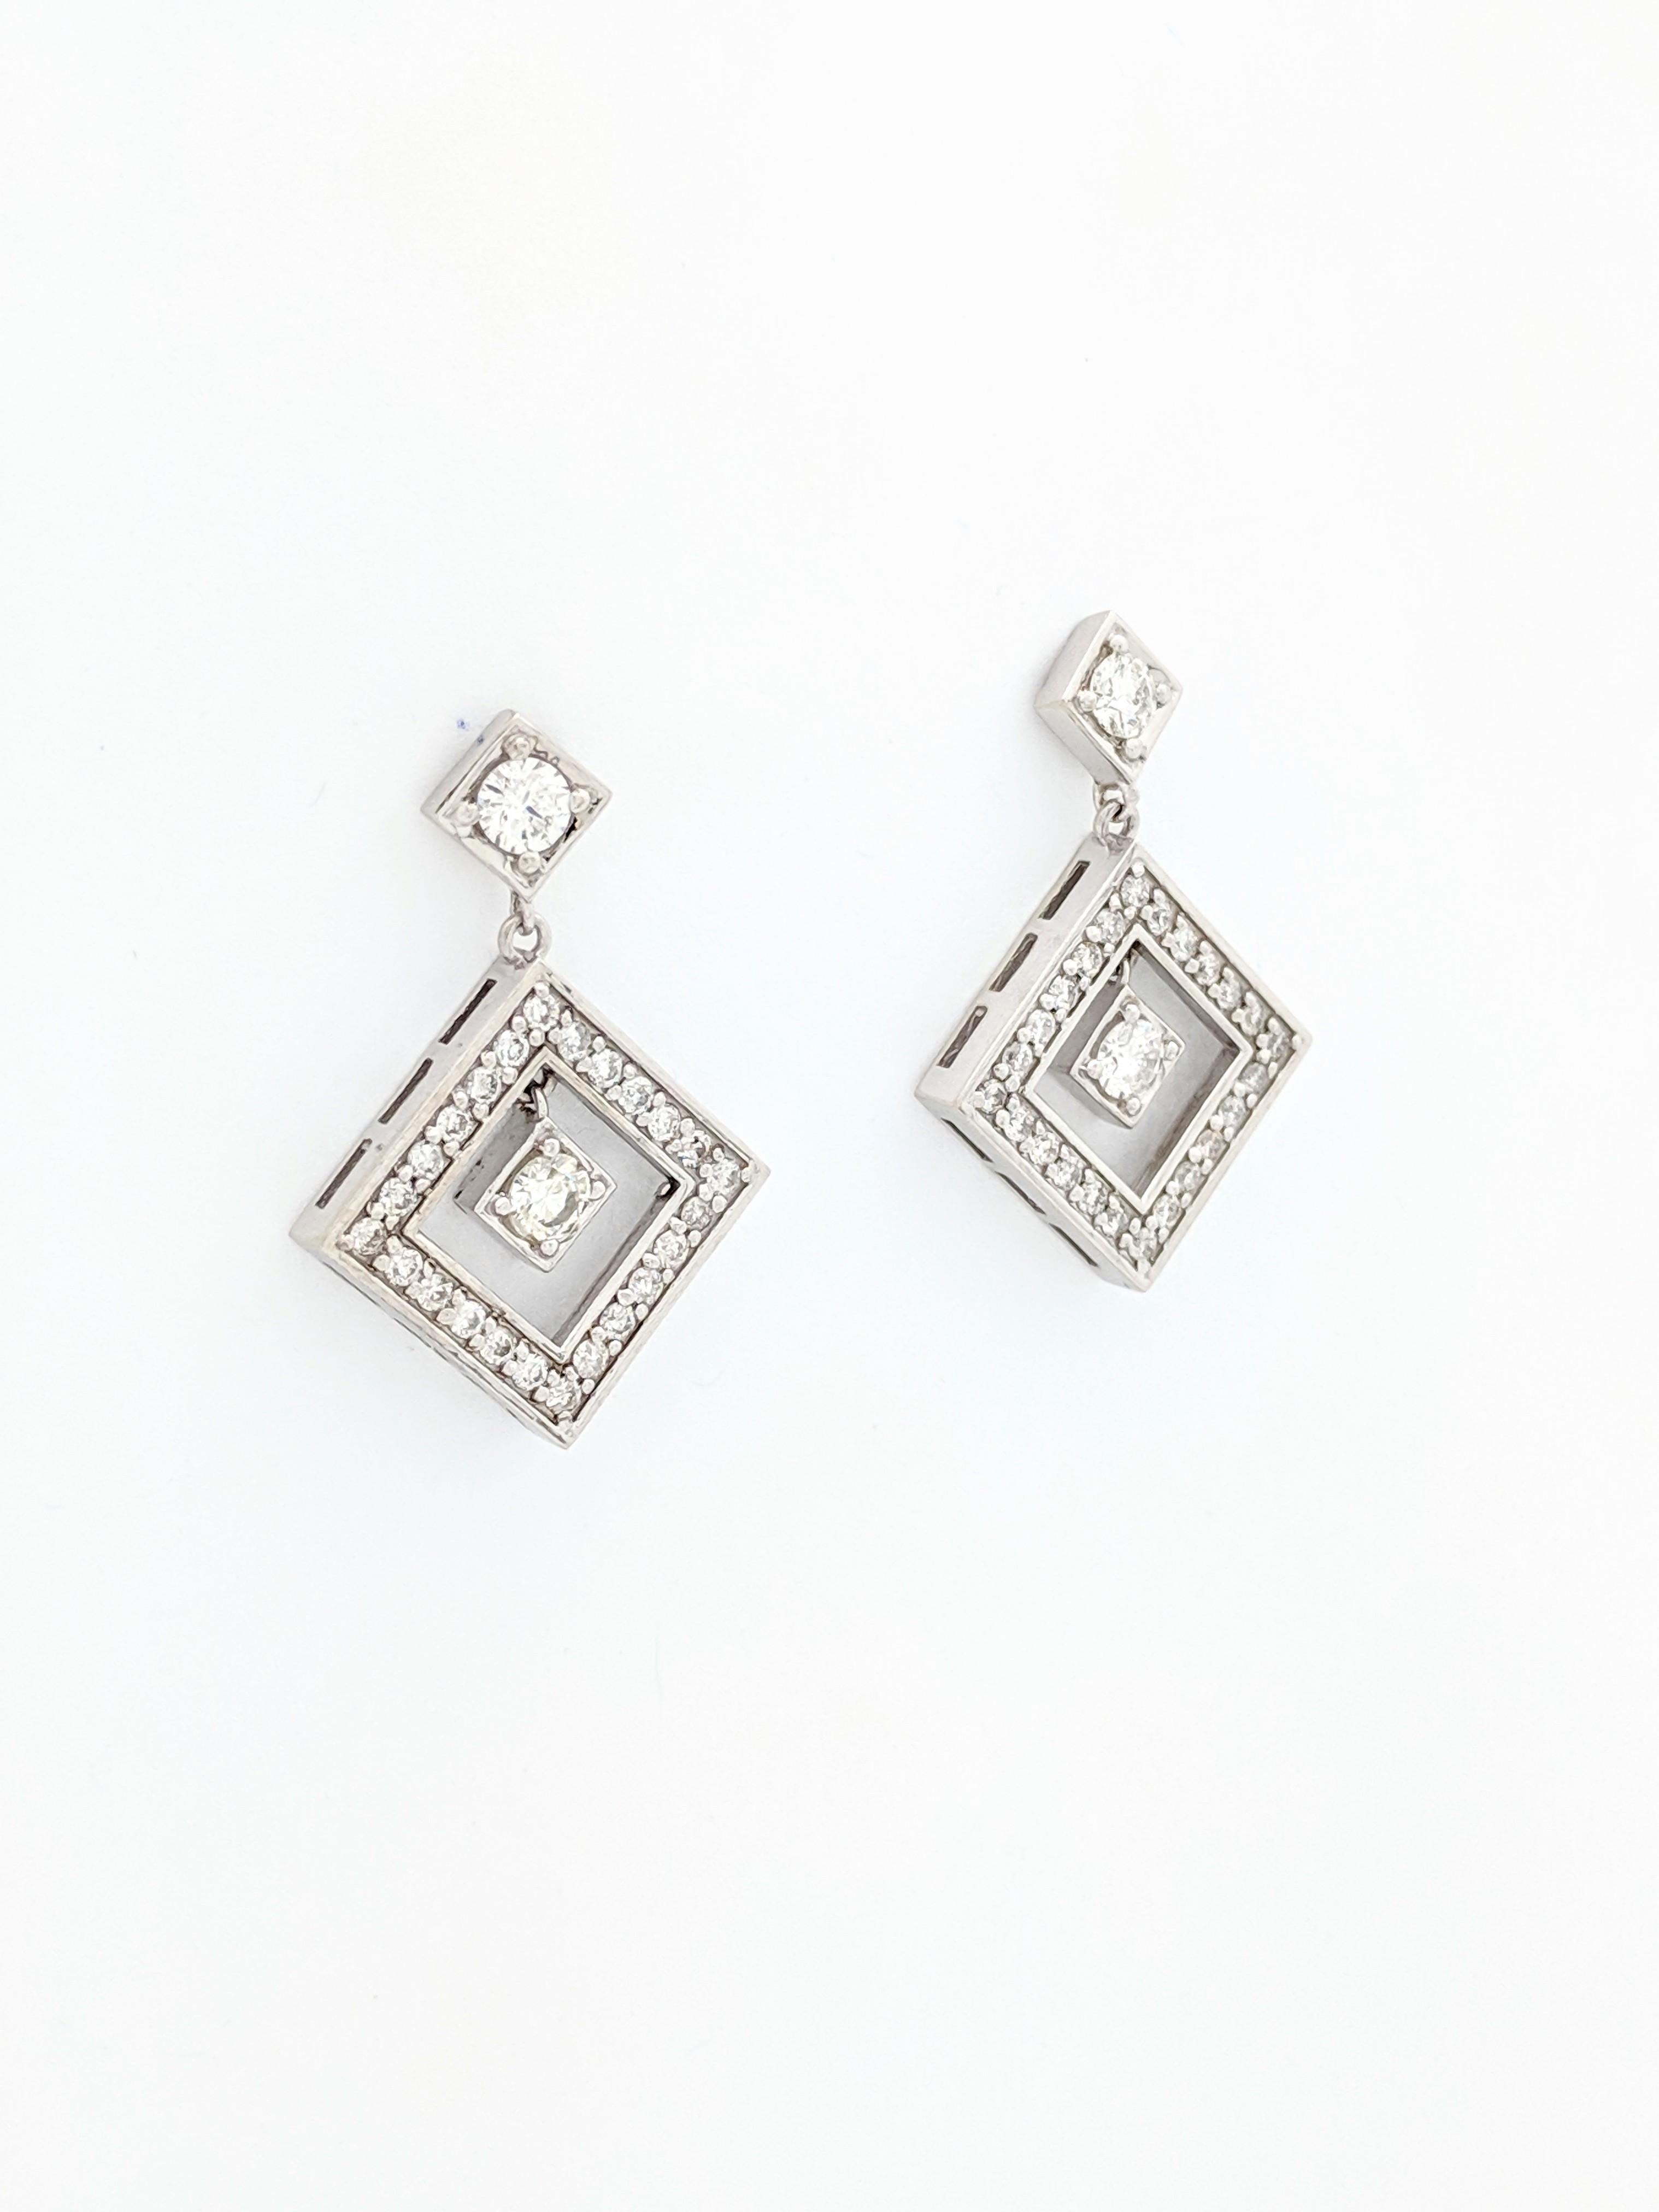 14K White Gold 1.80tcw Diamond Dangle/Drop Earrings SI2/H

You are viewing a gorgeous pair of diamond dangle/drop earrings.

These earrings are crafted from 14k white gold, weigh 7.1 grams, and measure 1 1/8